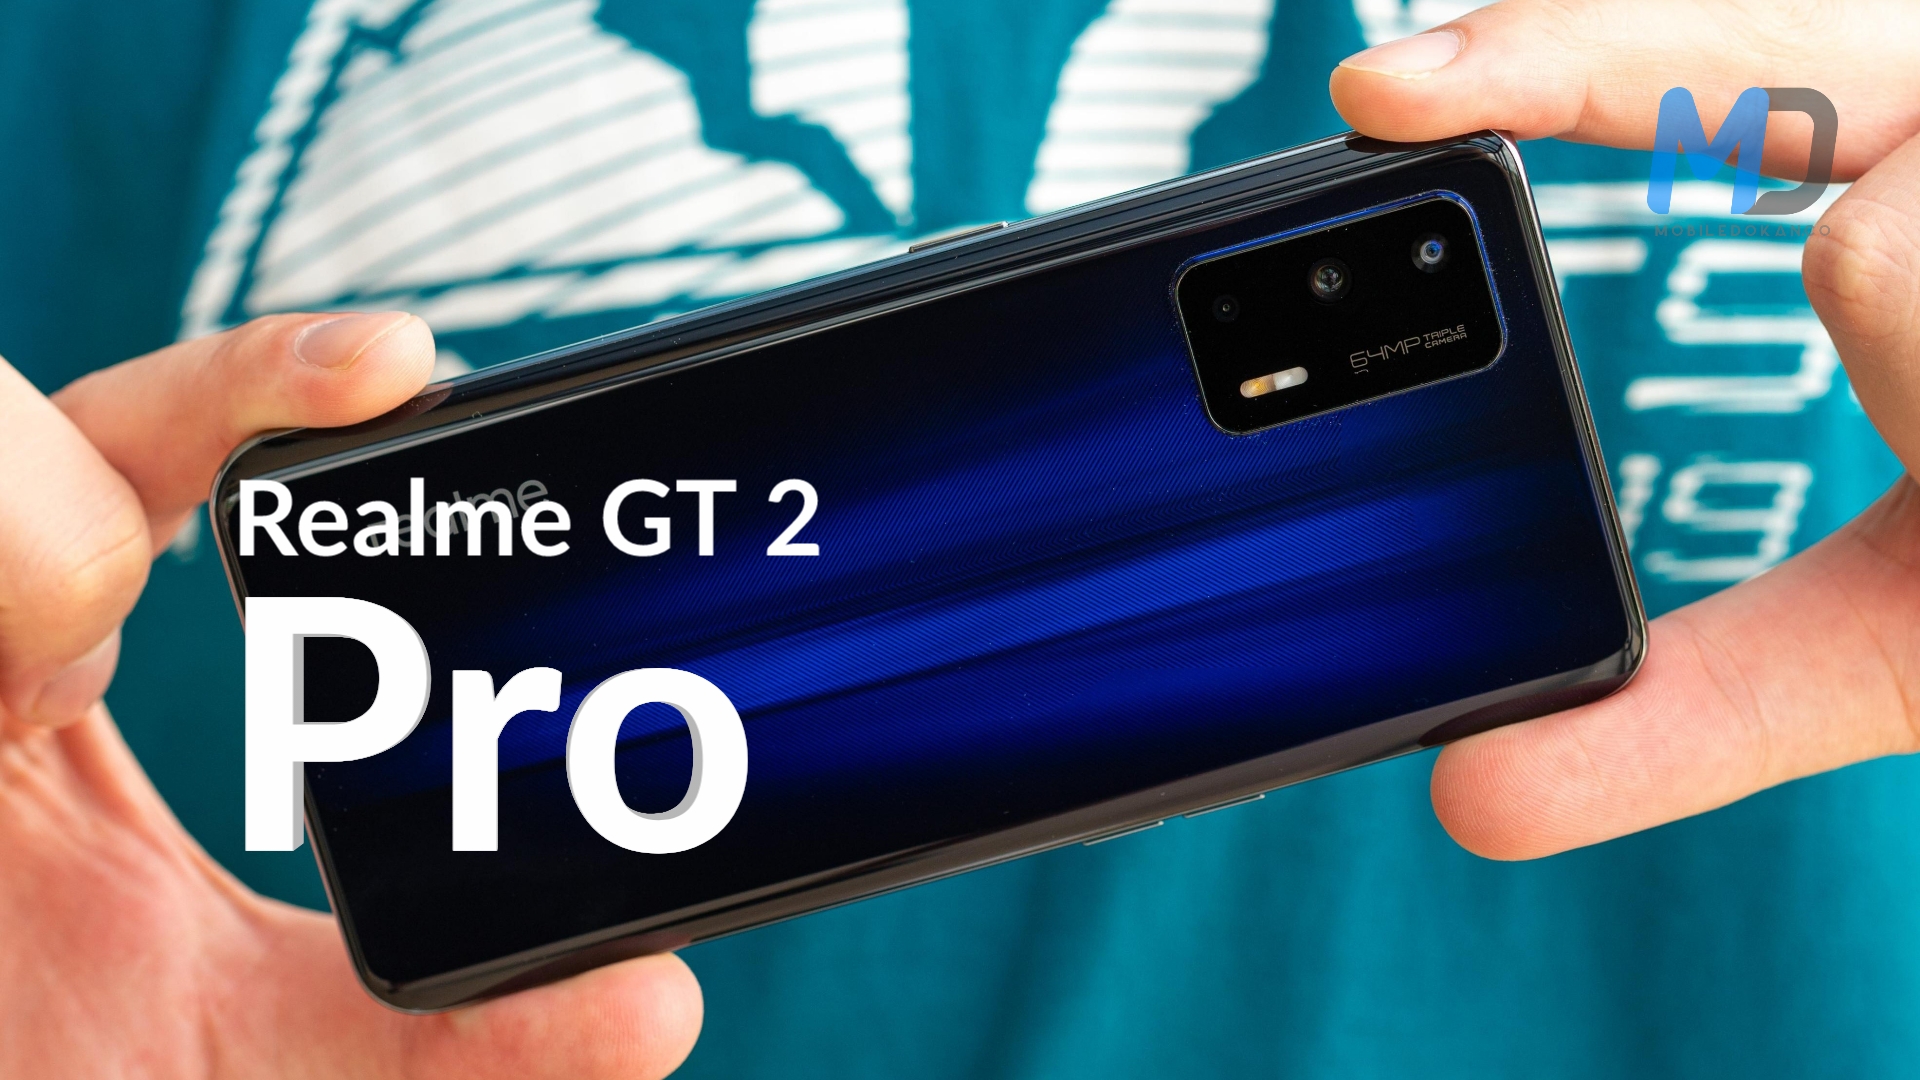 Realme GT 2 Pro_s key specs confirmed by AnTuTu, 120Hz screen in tow